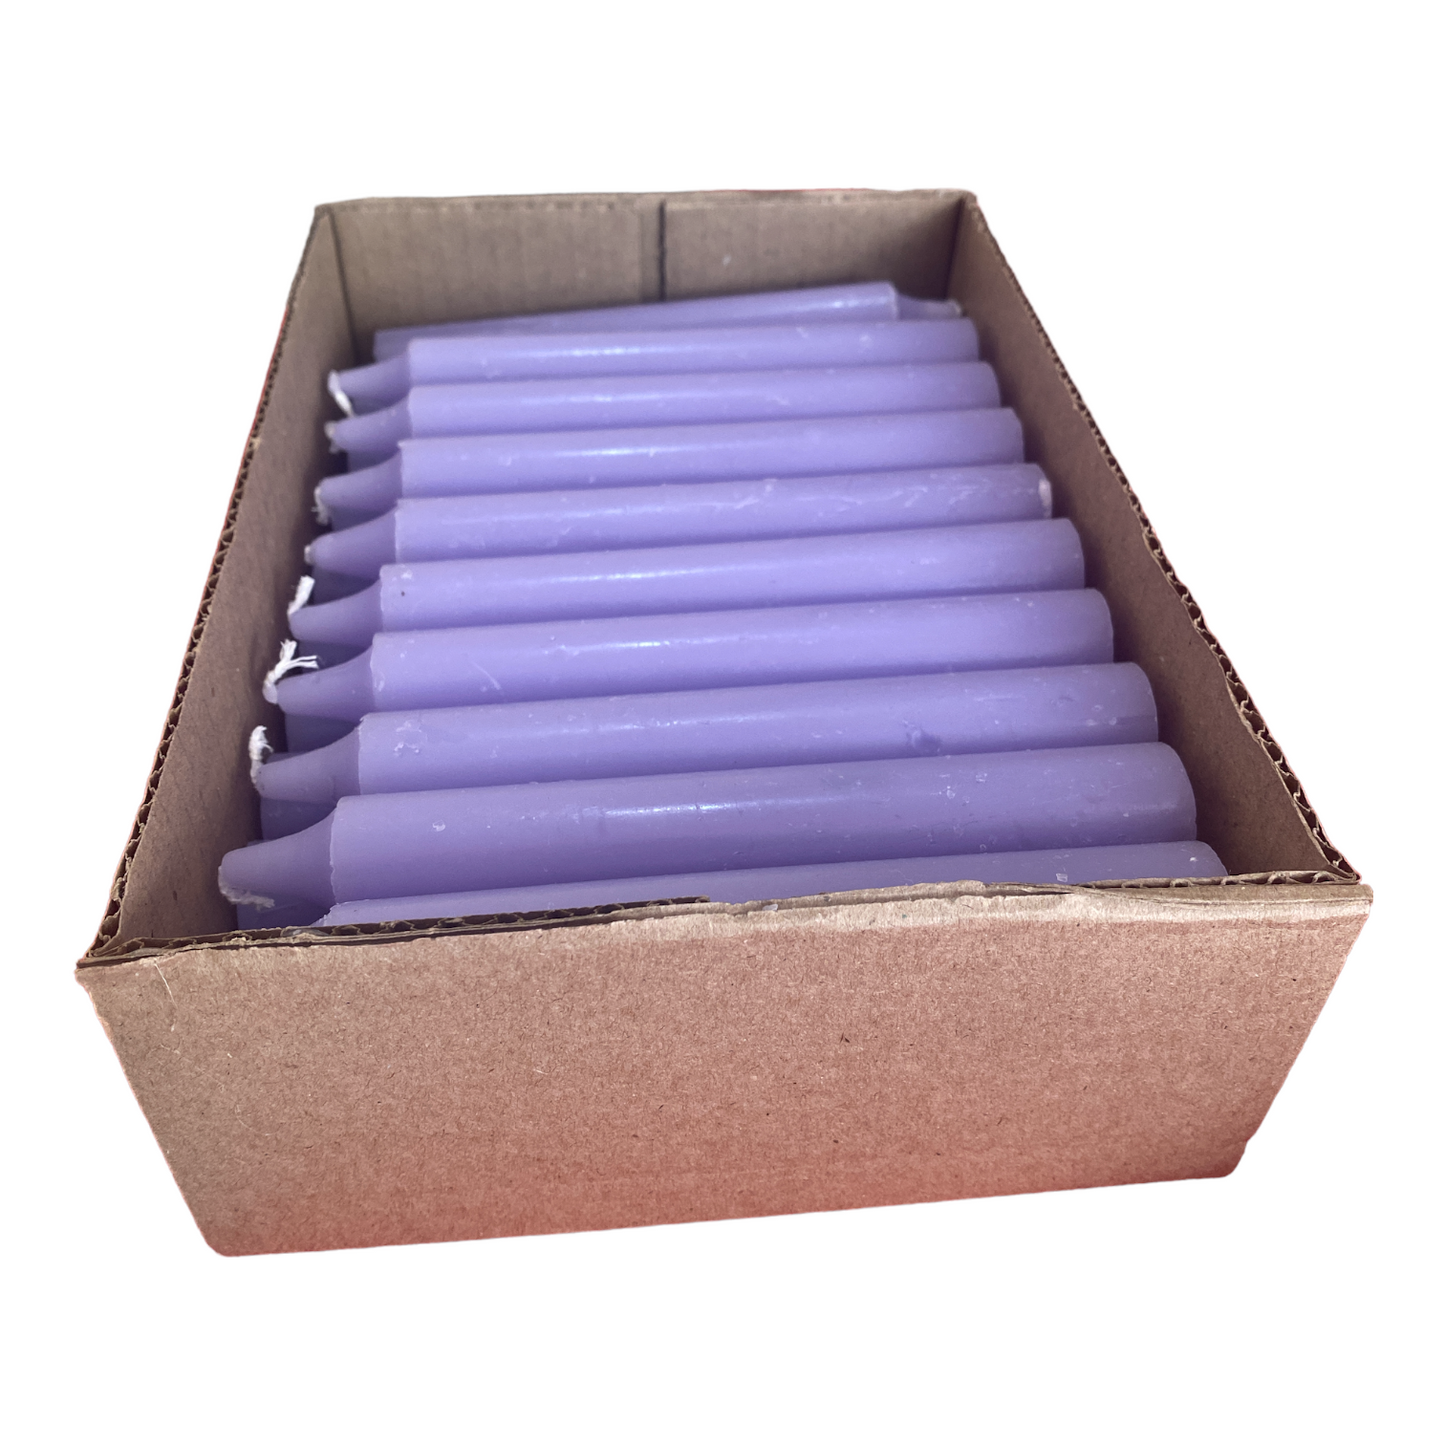 Box of 30 Purple Candles - Solid- 15cm